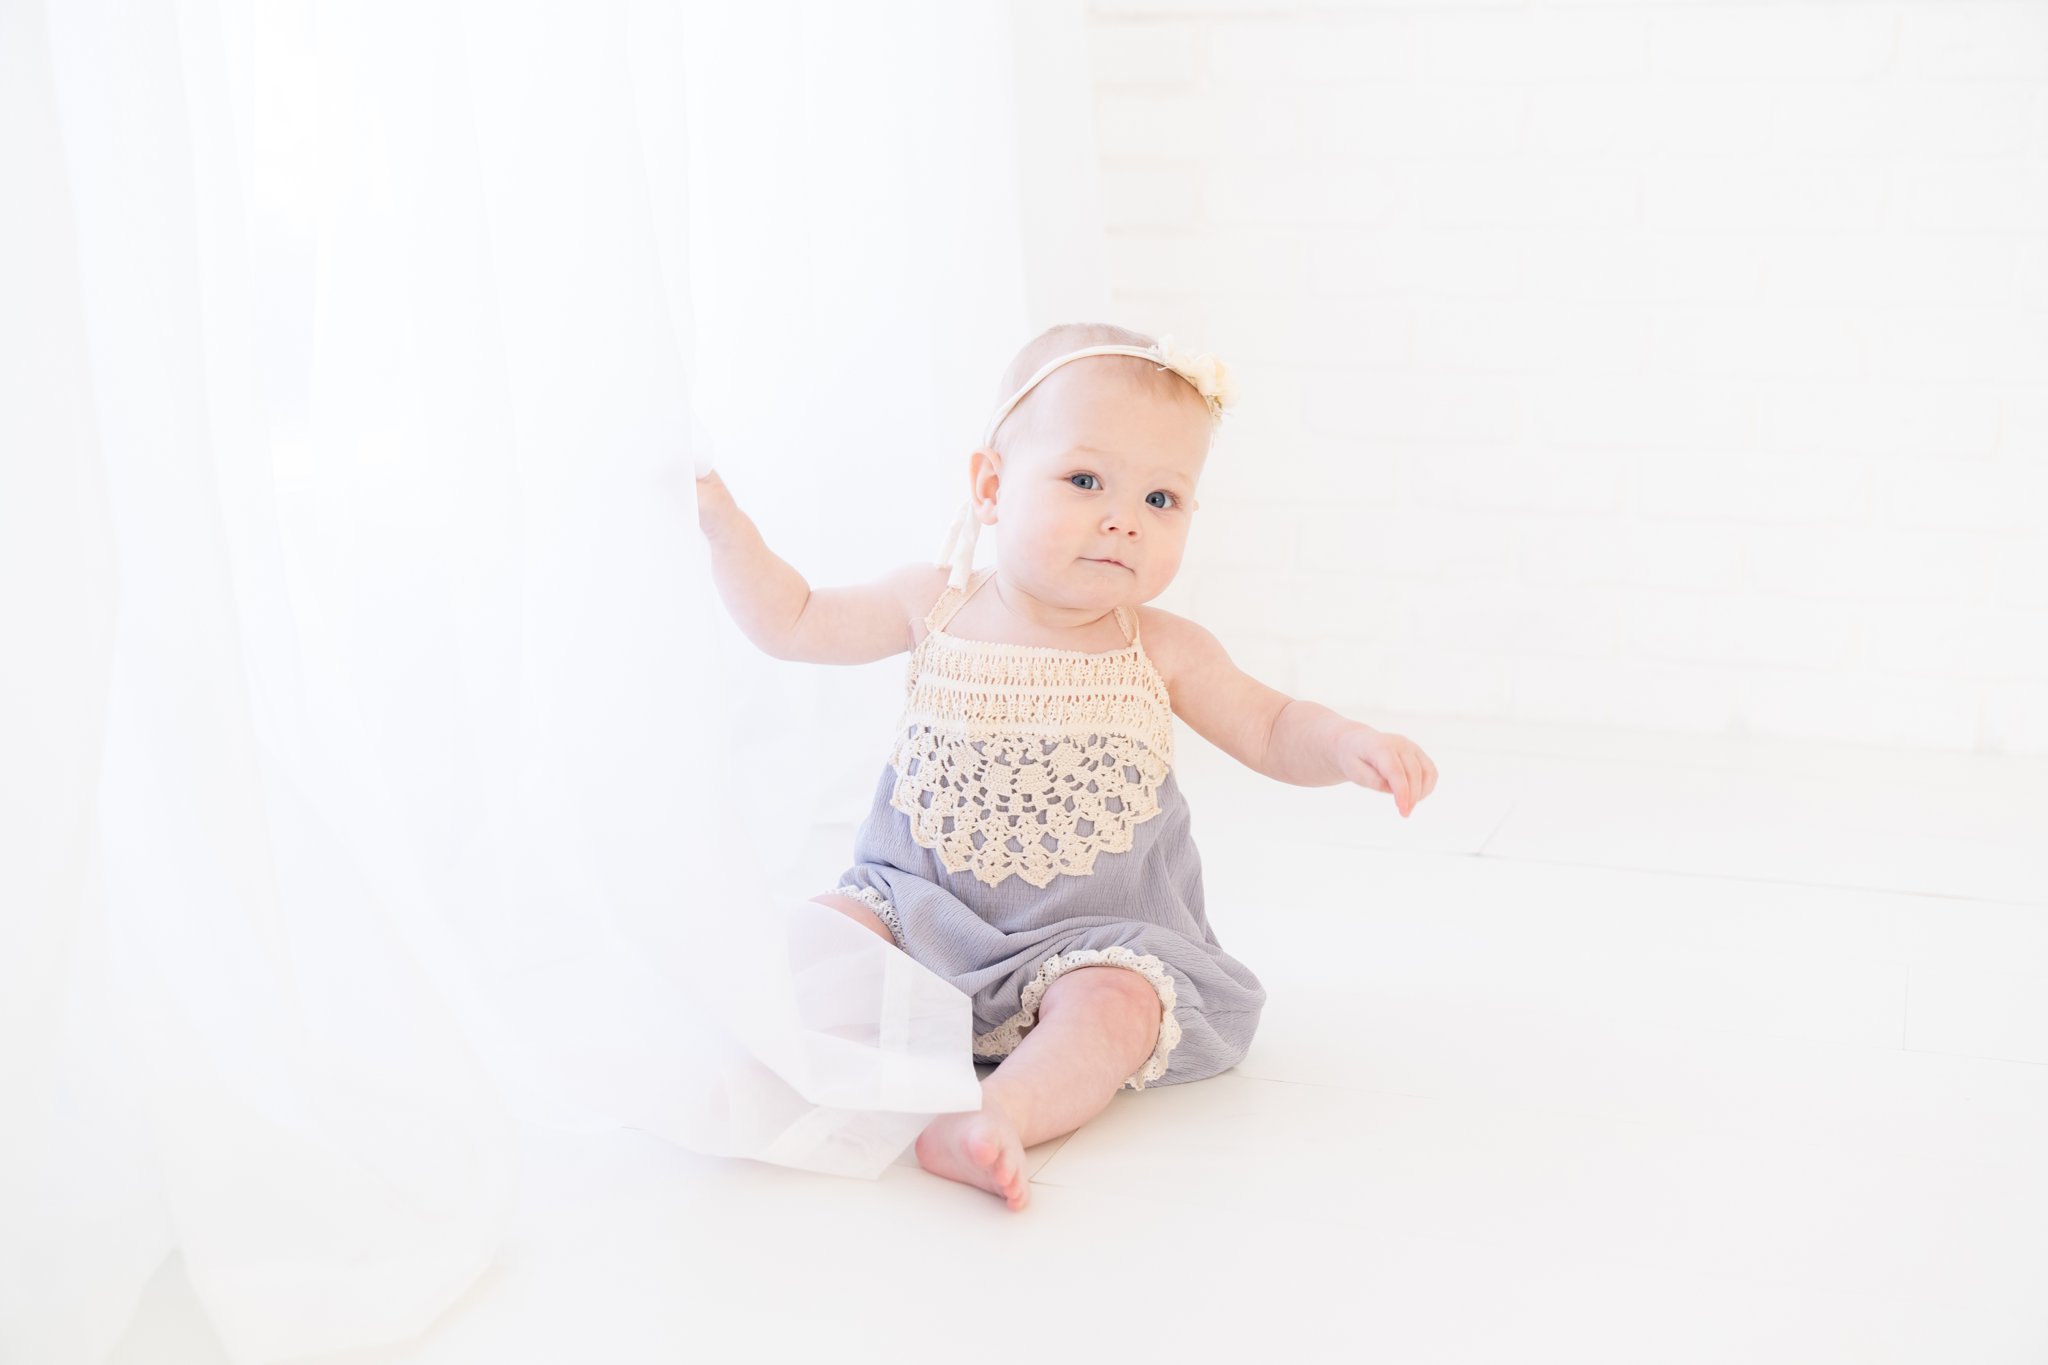 Baby girl being photographed in photography studio.